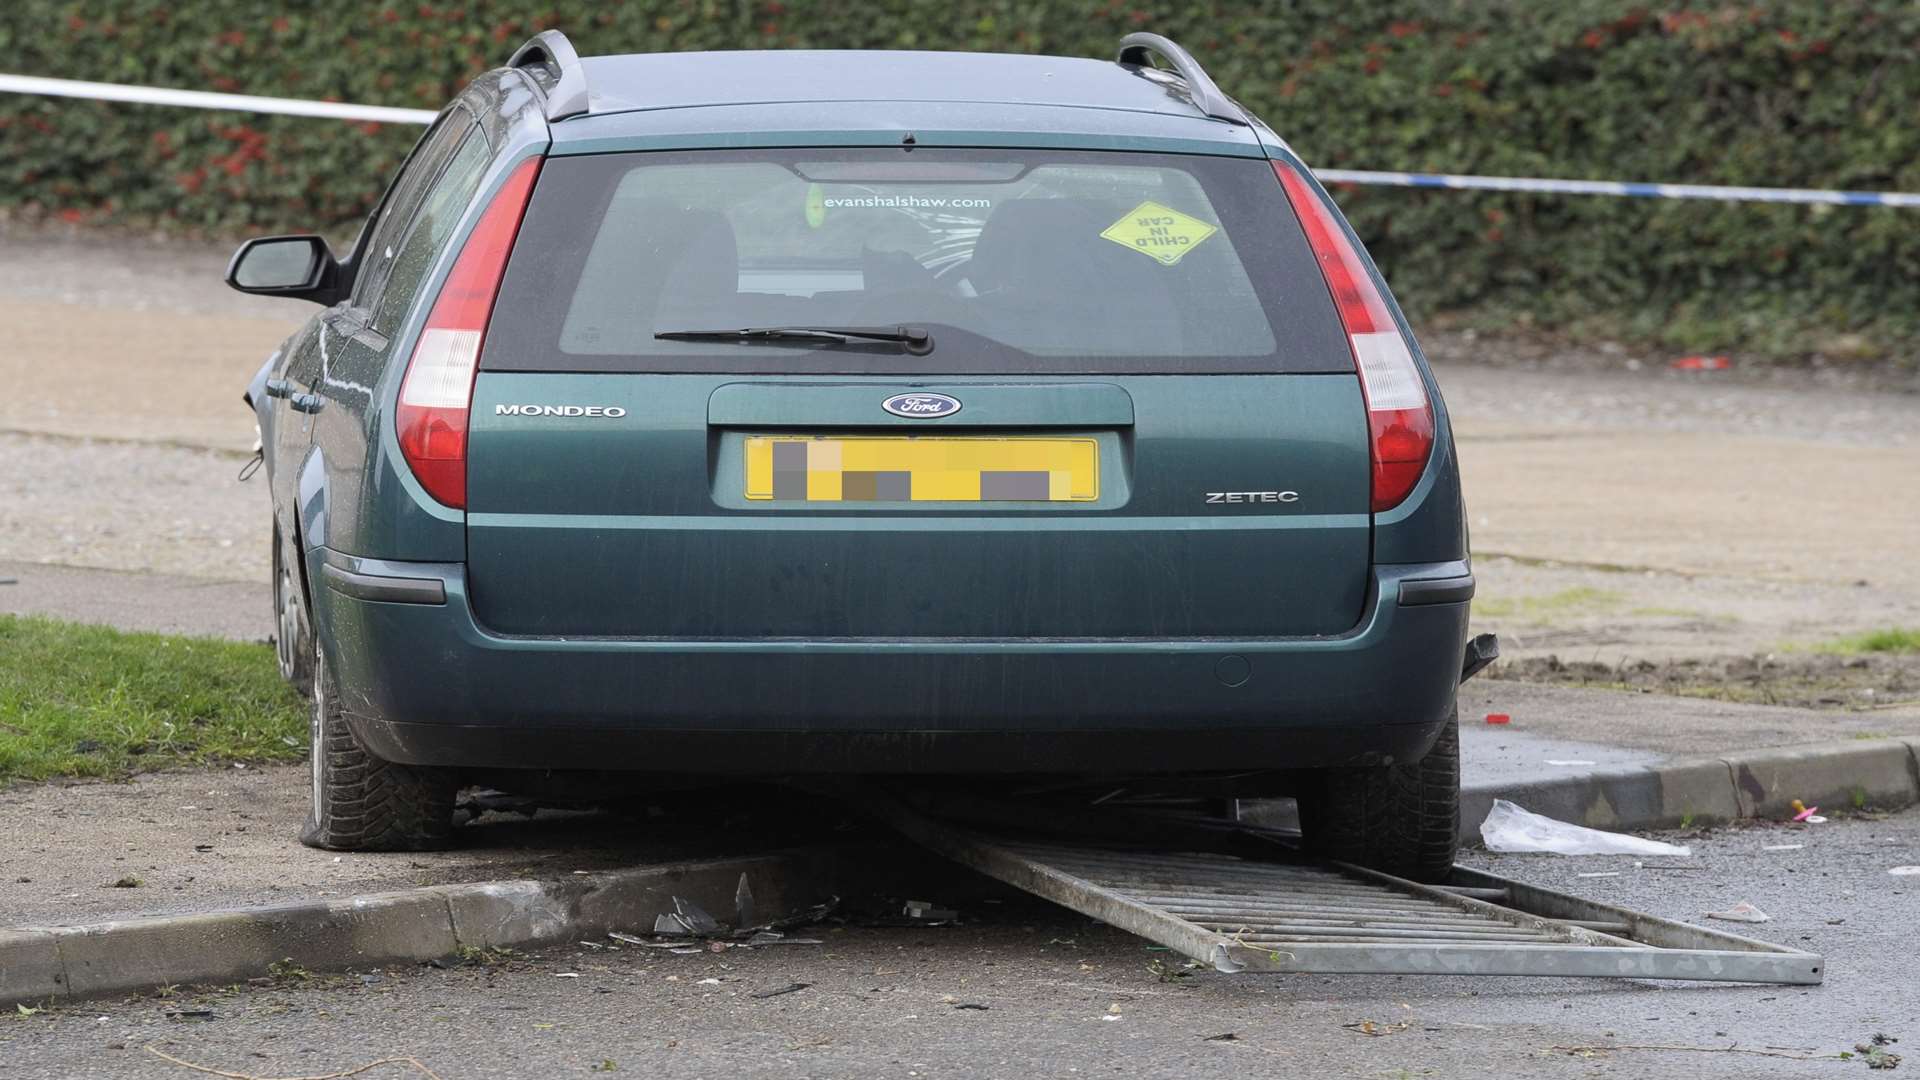 The car involved in the hit-and-run in Gillingham. Picture: Andy Payton